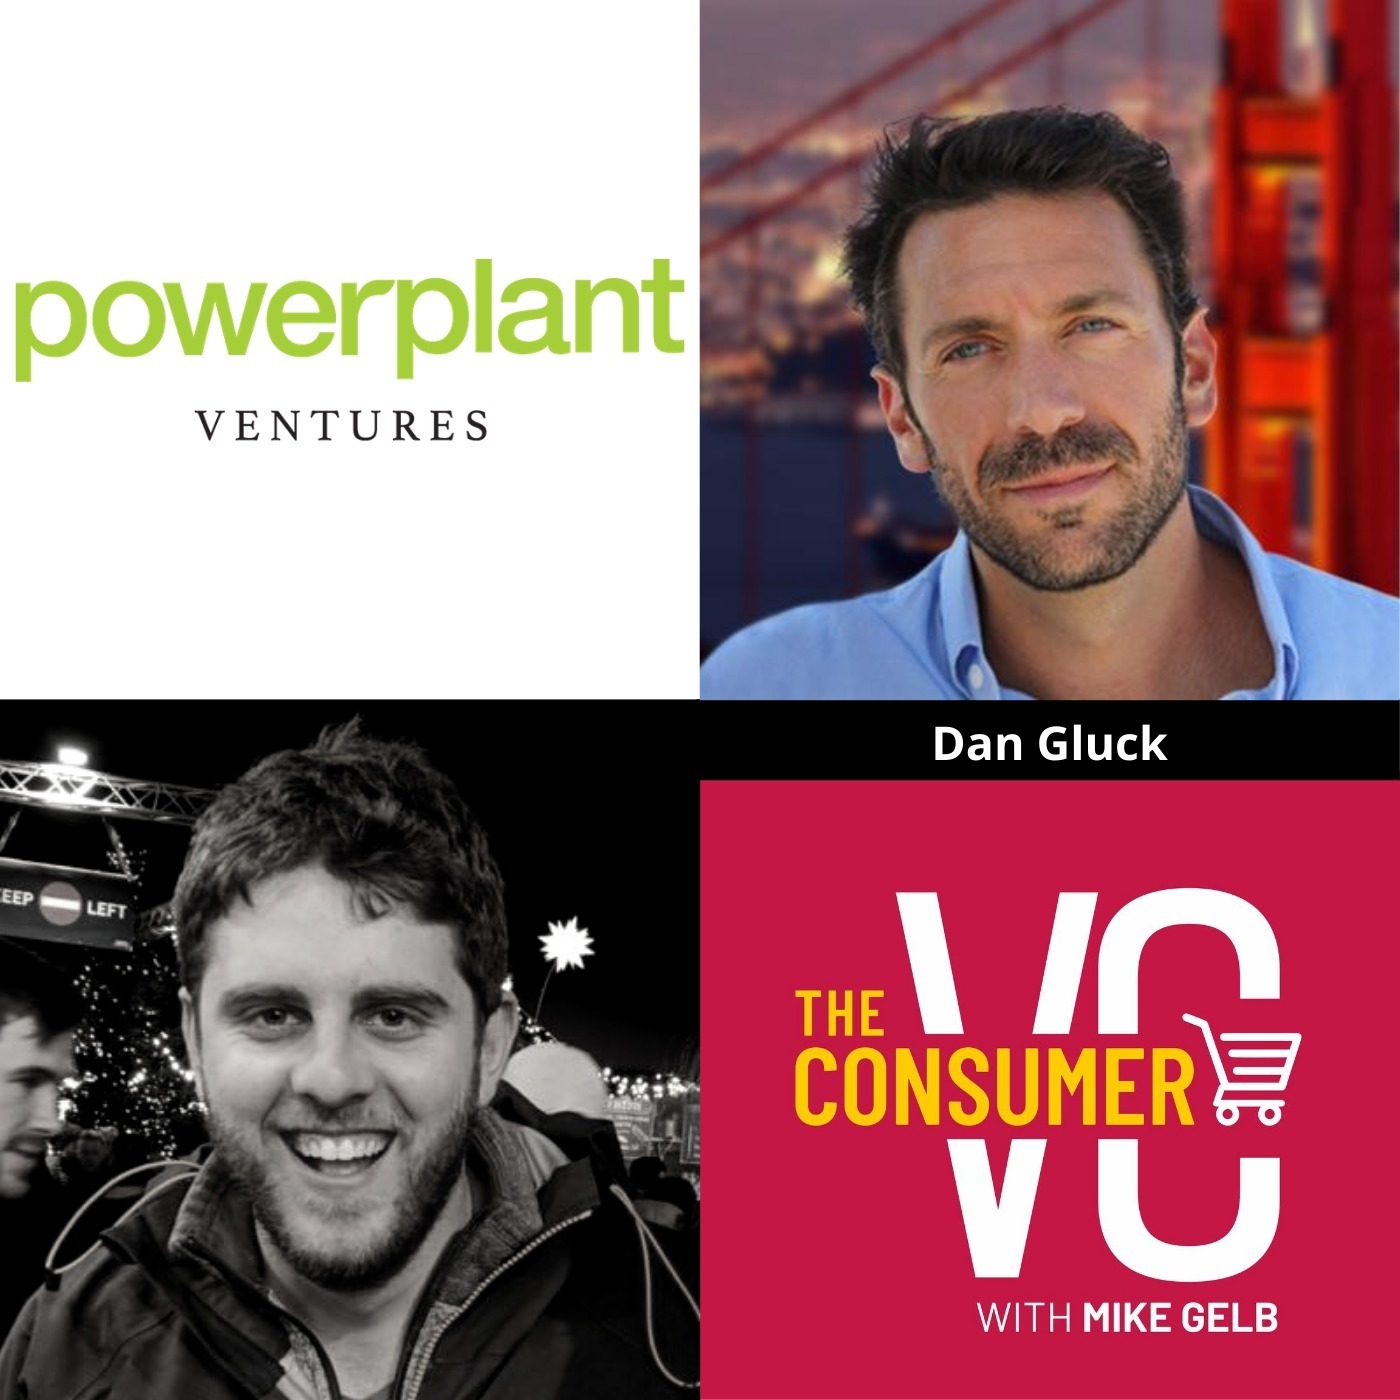 Dan Gluck (Powerplant) - The Opportunity He Saw After Reading "Born To Run" and His Inspiration Behind Investing in Plant Based Products